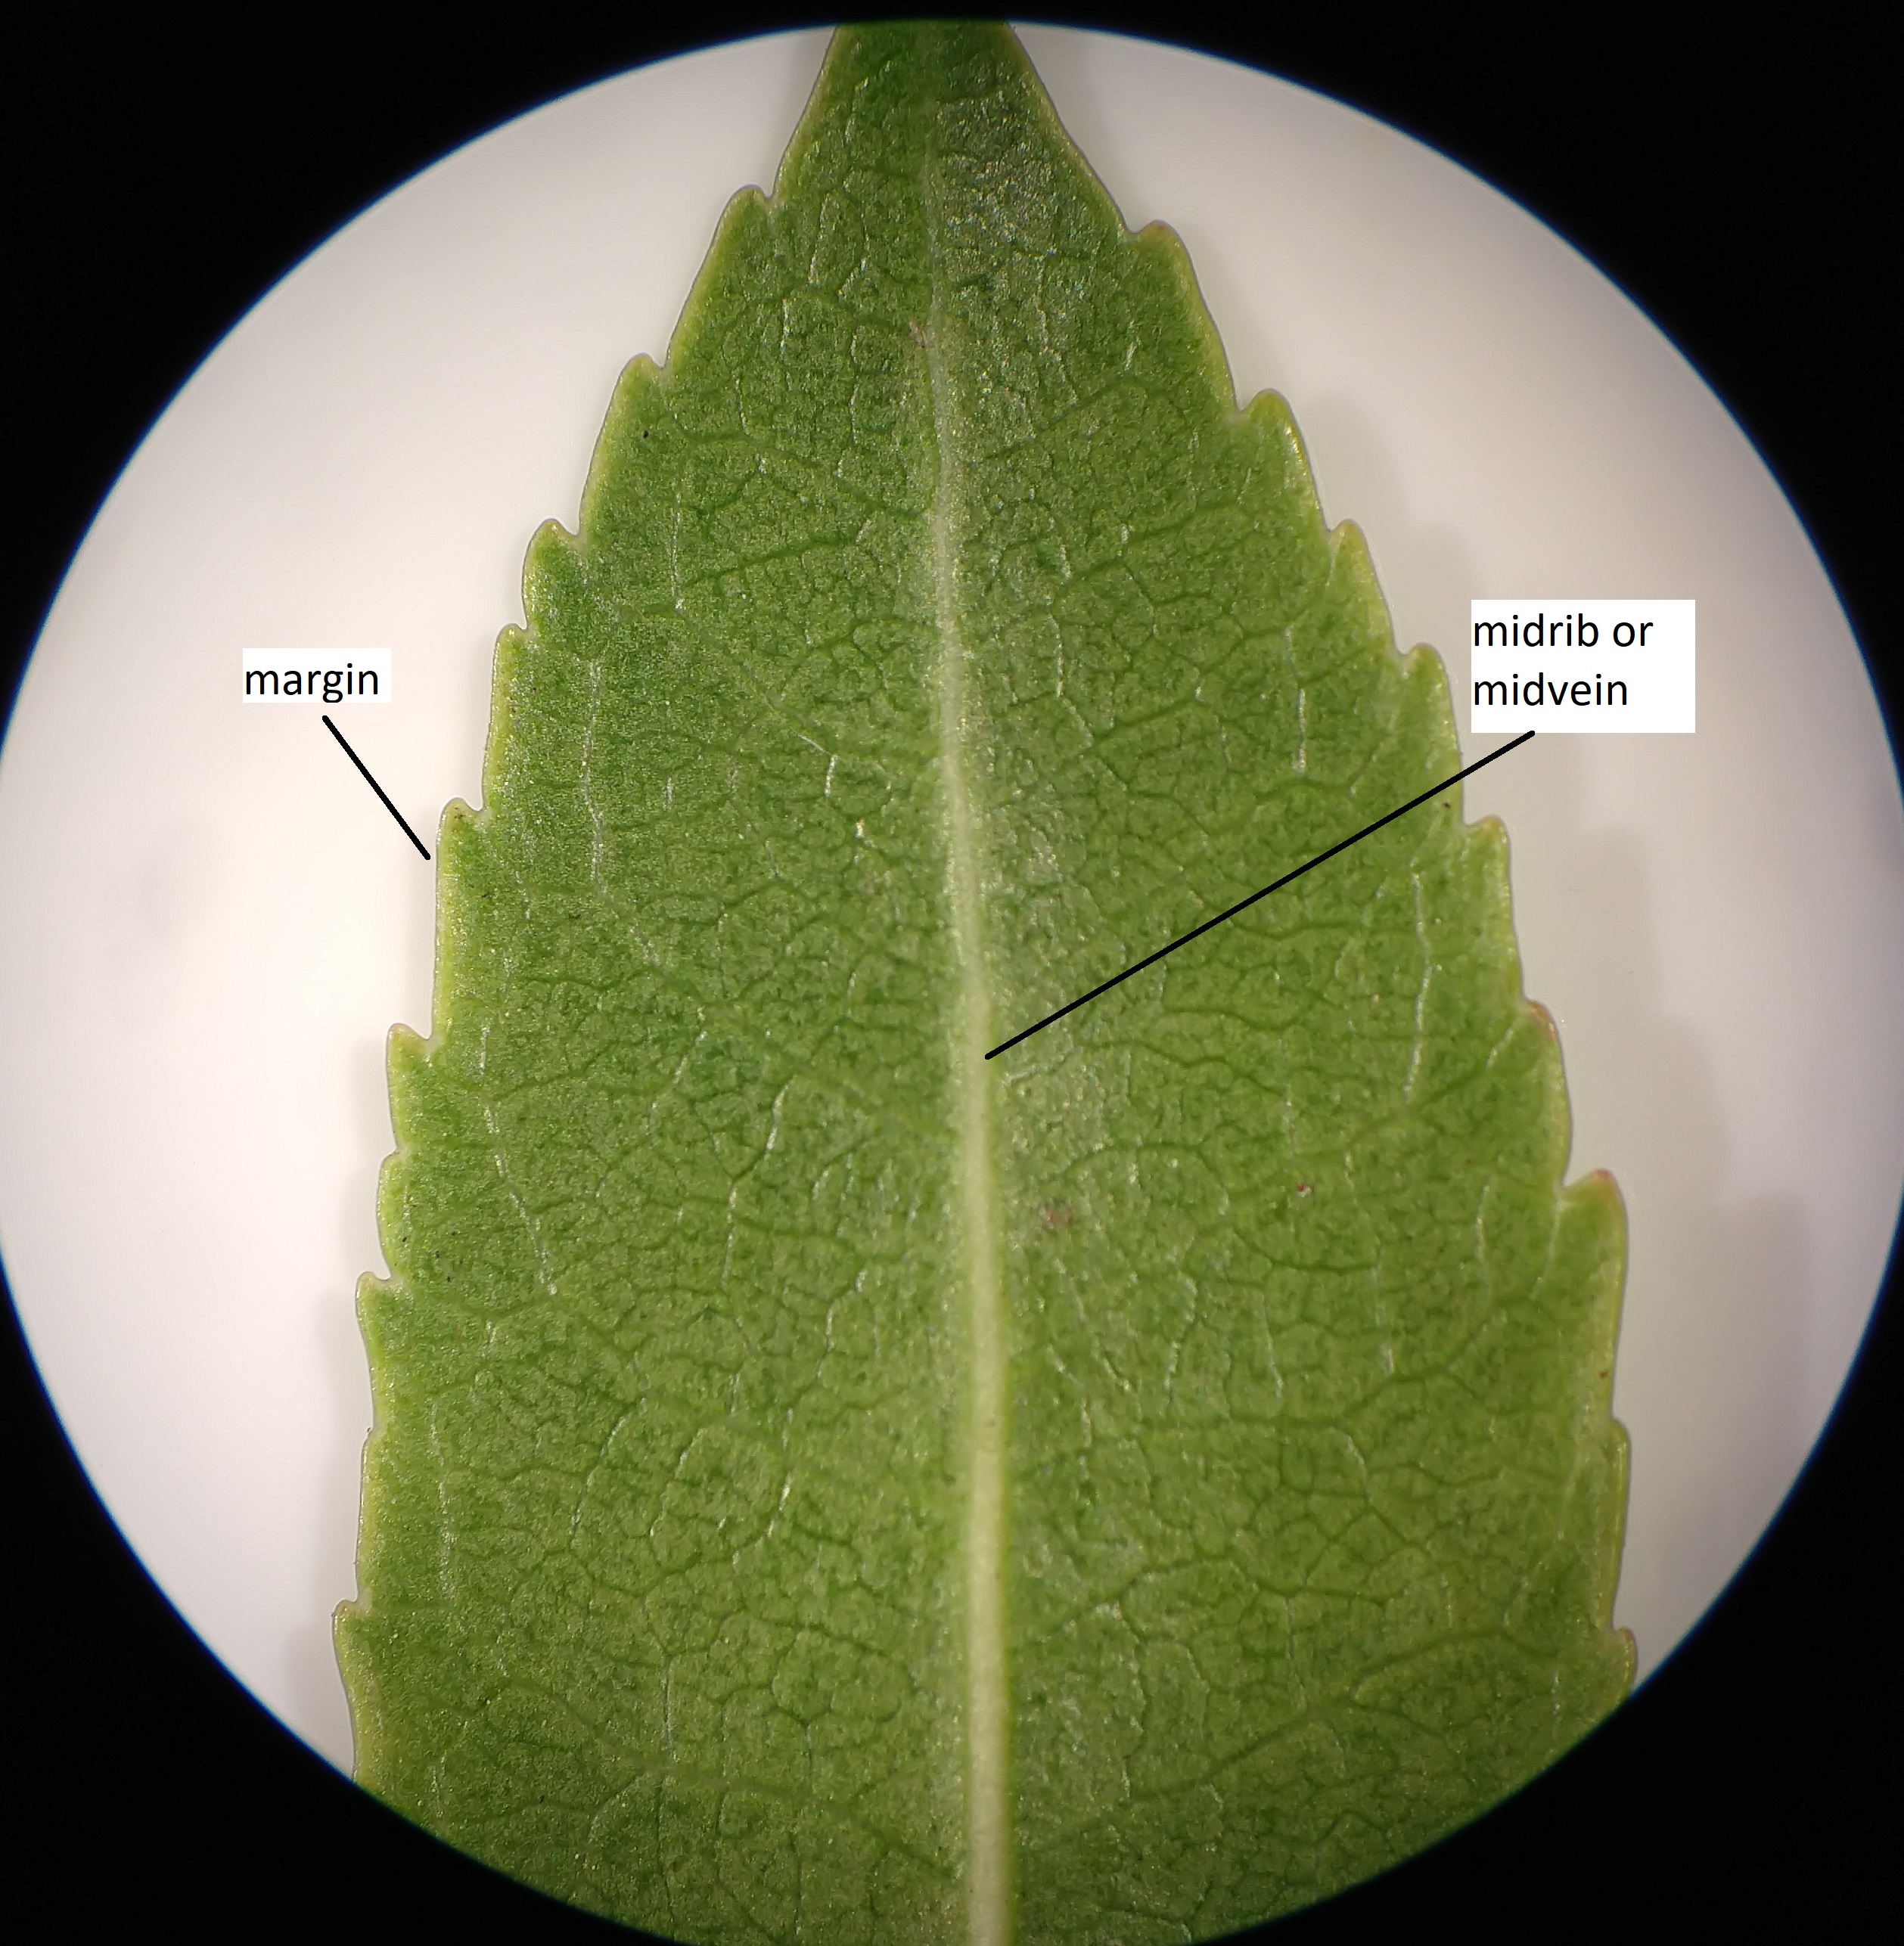 A leaf with netted venation has the midvein and margin labelled